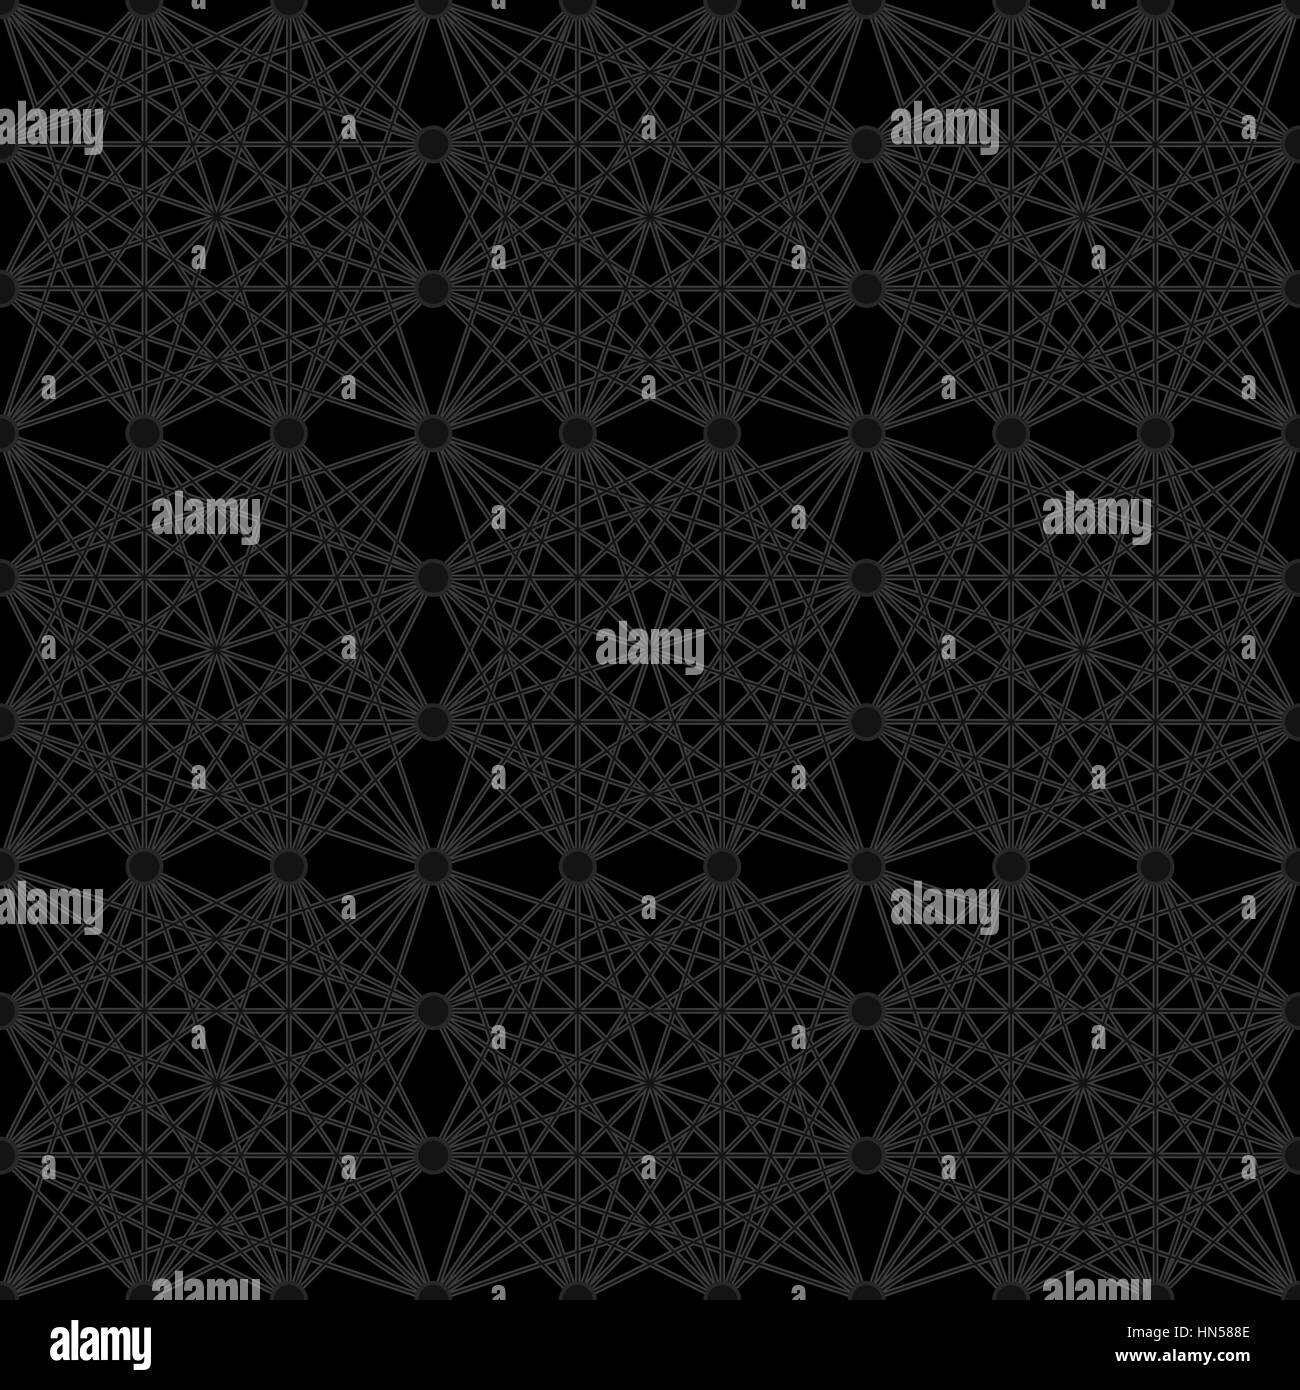 Intricate repeating square matrix pattern of neon lines on black background - seamless editable repeating vector background wallpaper Stock Vector